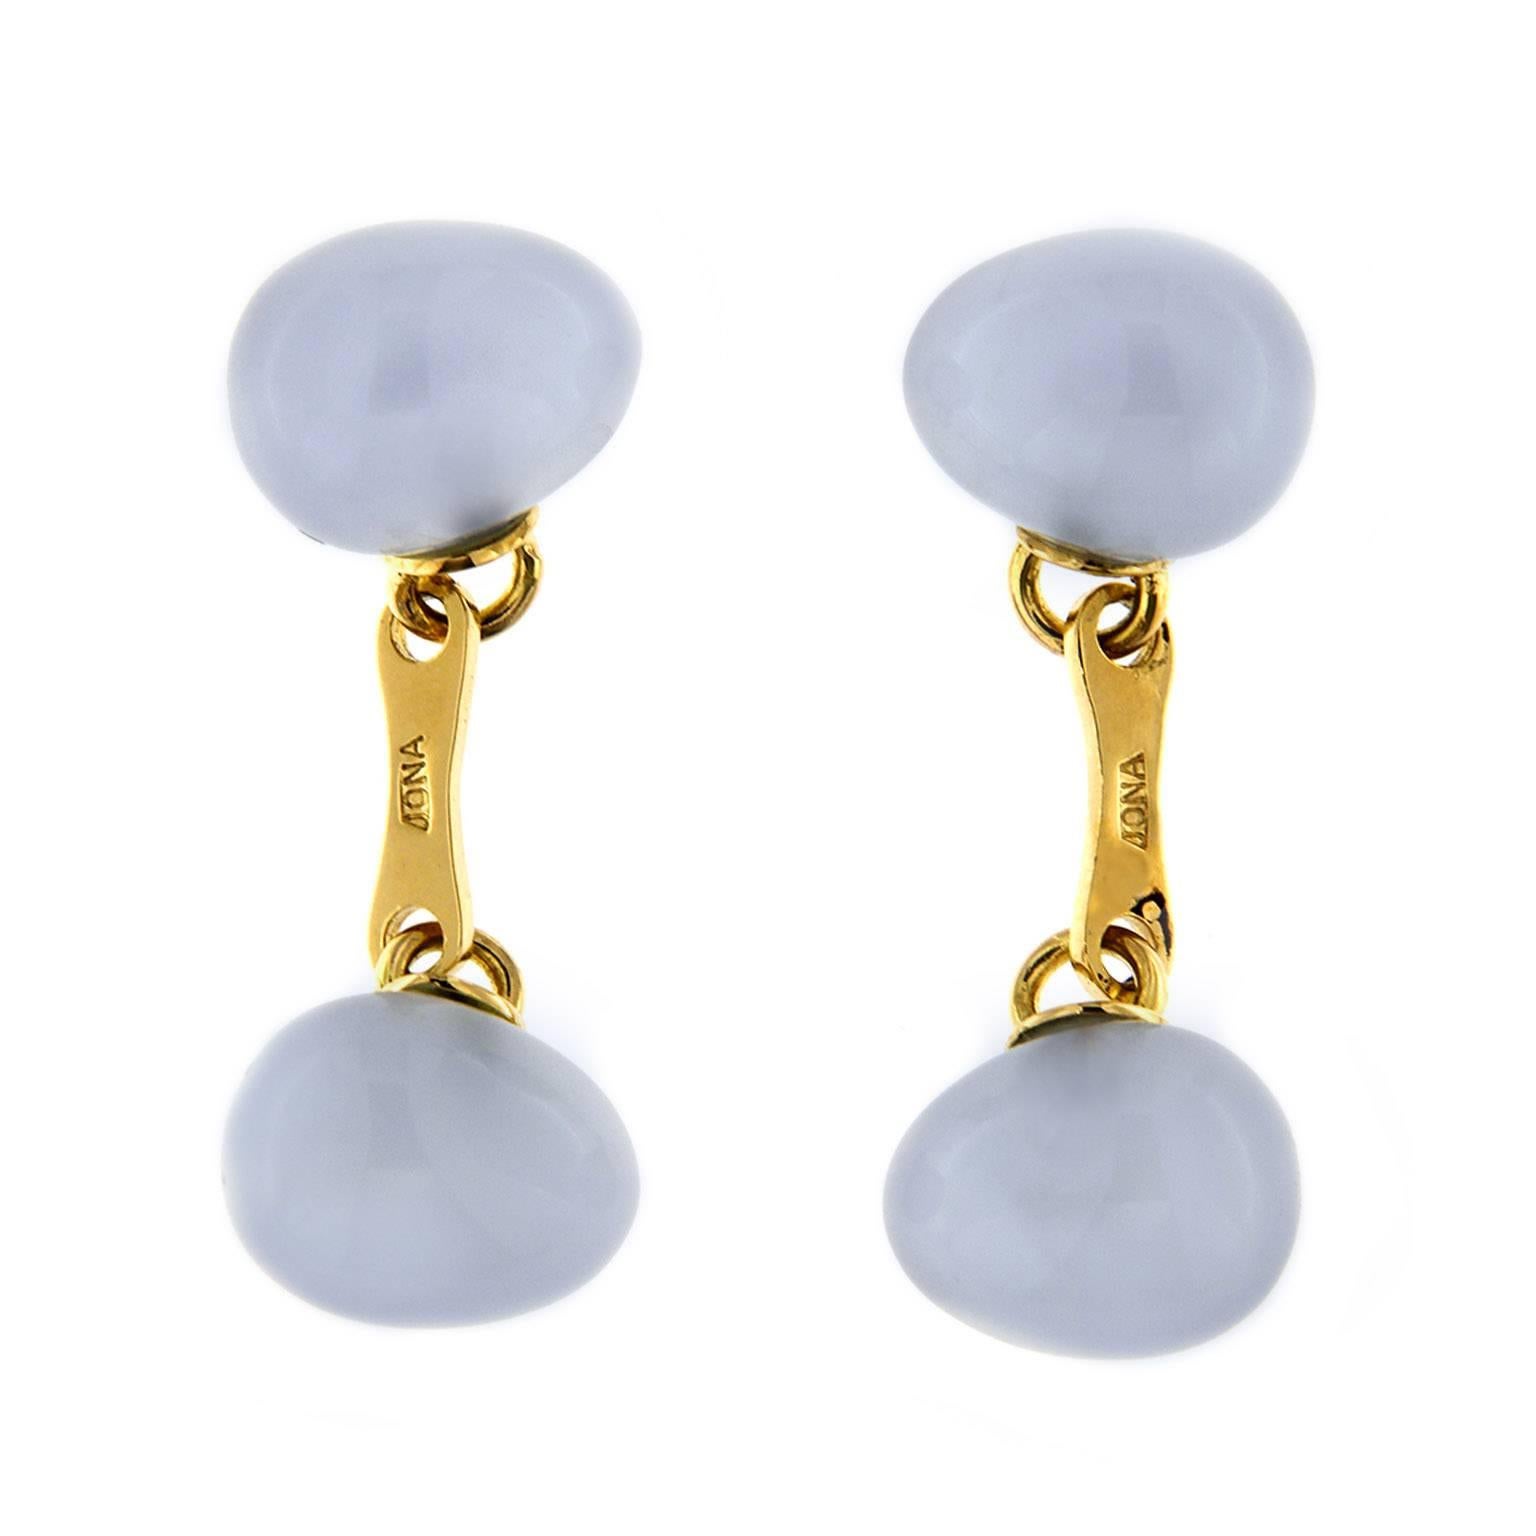 Jona design collection, crafted in Italy, 18 karat yellow gold, hand-carved egg-shaped Blue Chalcedony cufflinks.

All Jona jewelry is new and has never been previously owned or worn. Each item will arrive at your door beautifully gift wrapped in